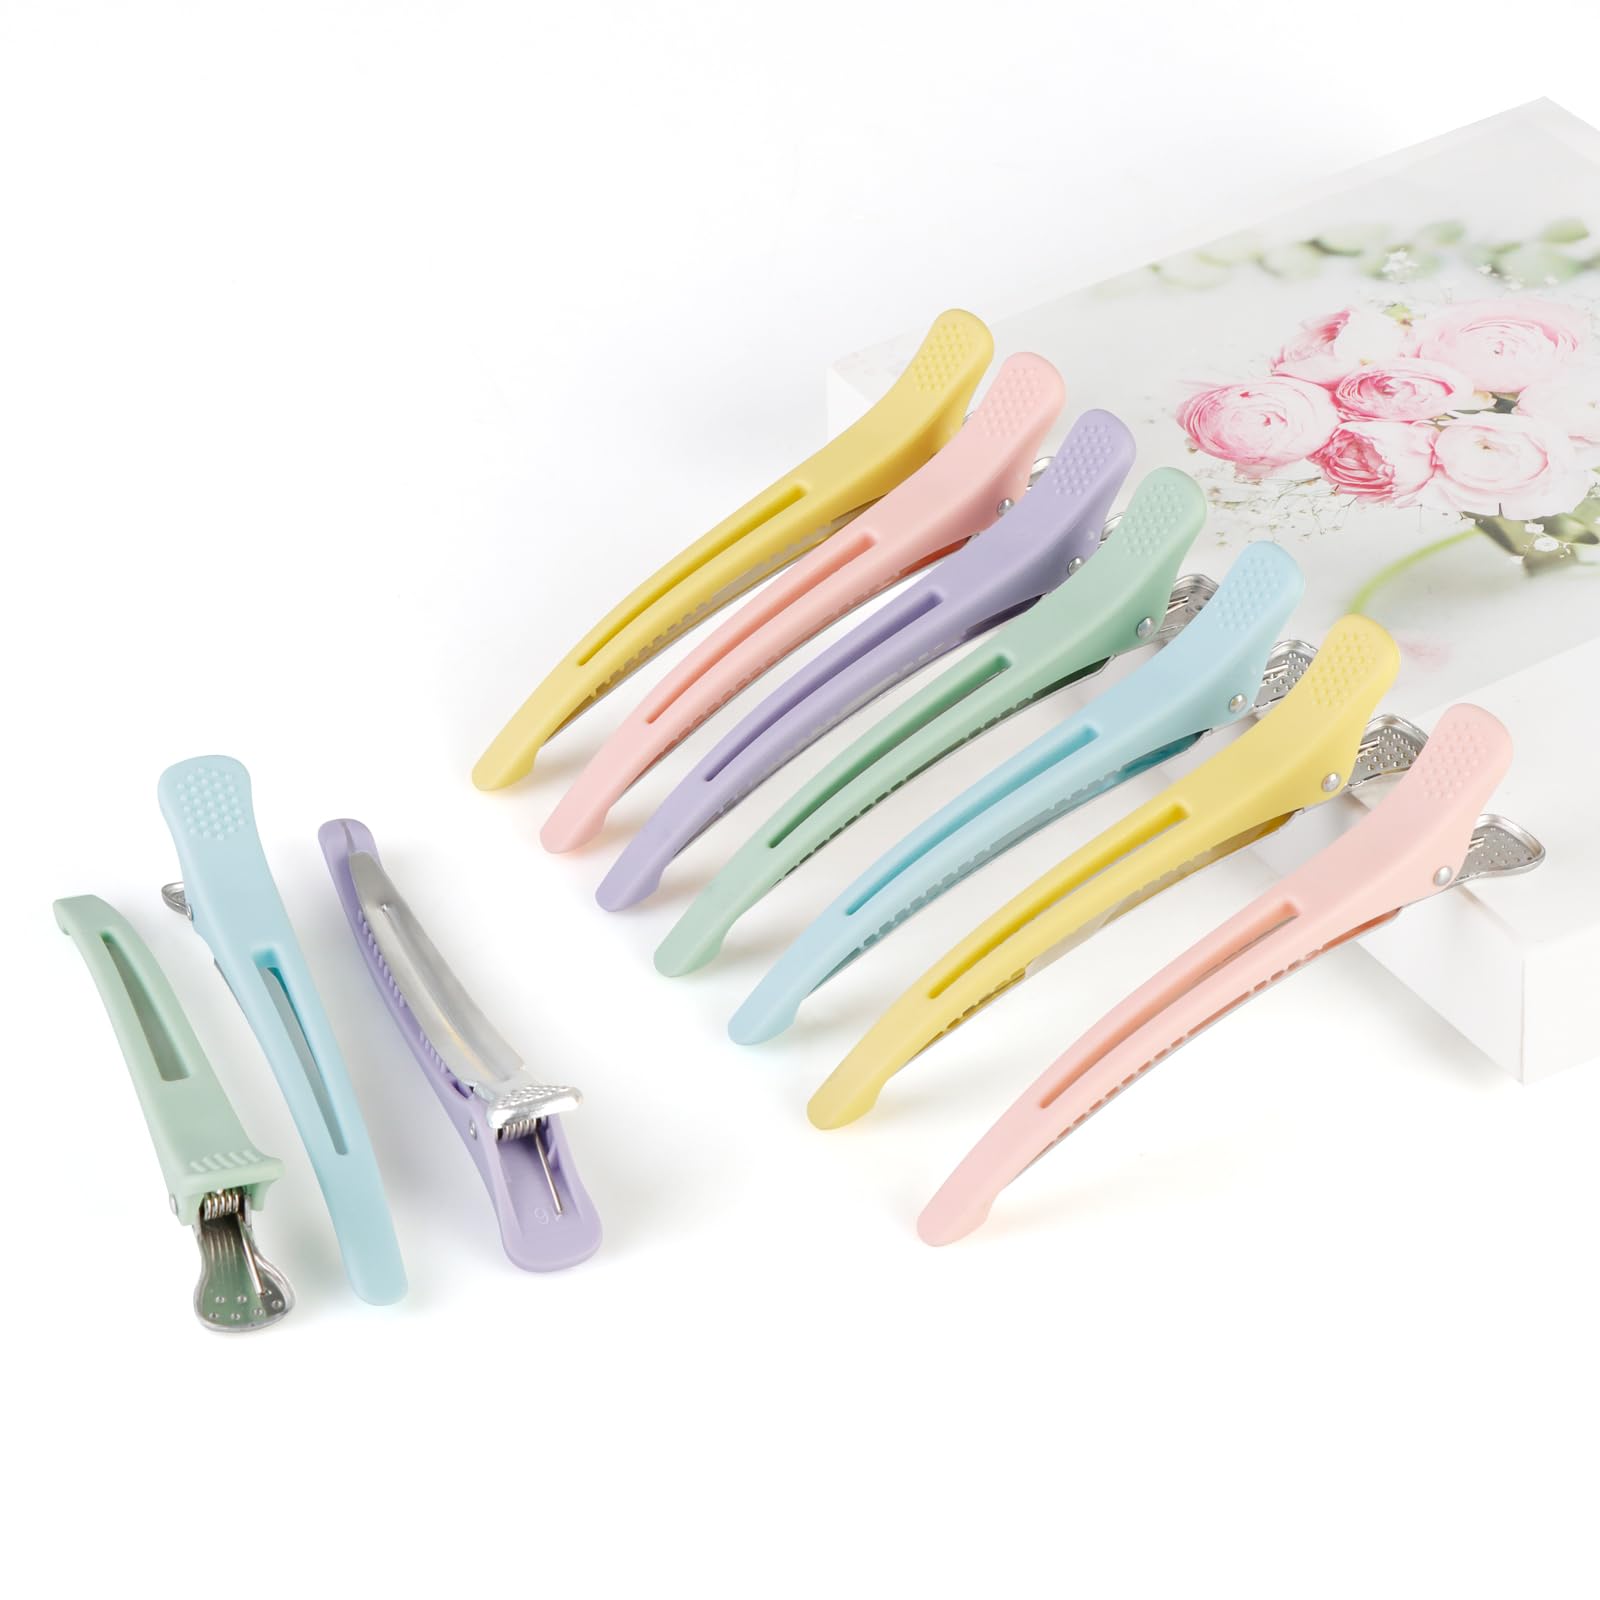 Neon Hair Clips, 10 Pcs Salon Hair Clips, Duck Billed Hair Roller Clips for Styling Sectioning, Professional Hair Styling Clips, Hair Cutting Clips for Women - 4.32” Long